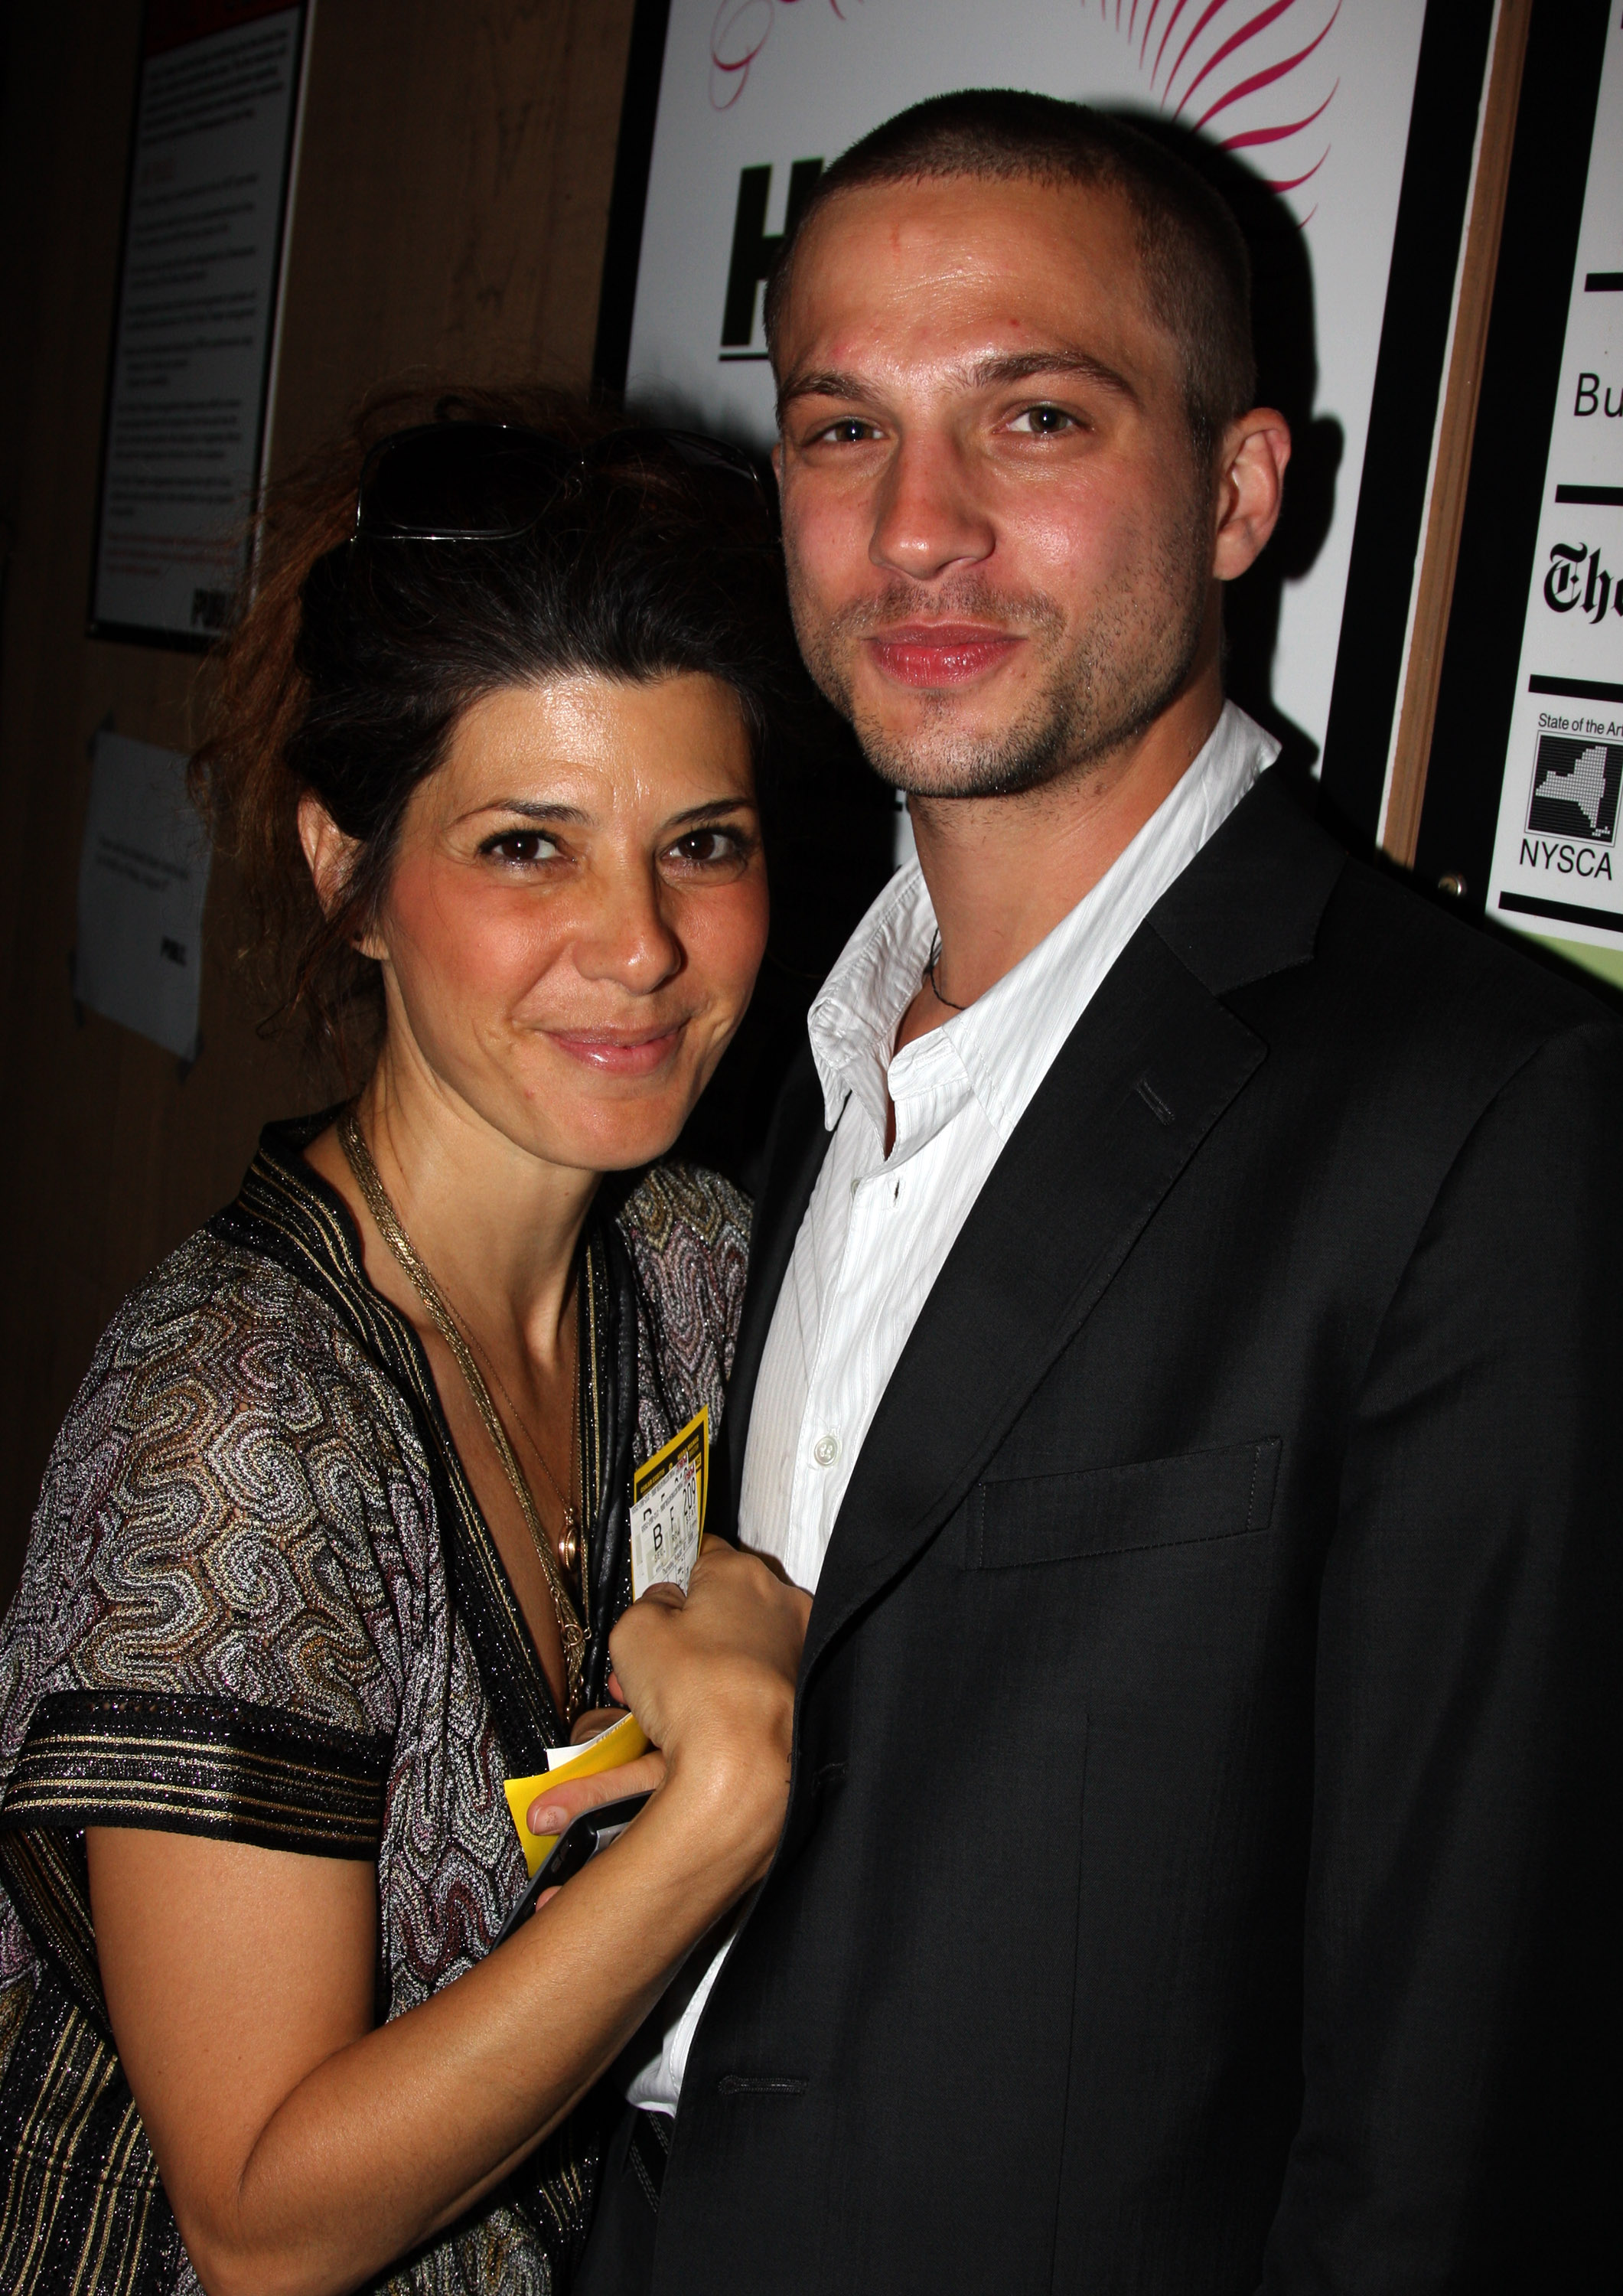 Marisa Tomei and Logan Marshall Green at the Opening Night for "Hair" at Shakespeare in the Park at the Delacorte Theater in Central Park on August 7, 2008 in New York City. | Source: Getty Images